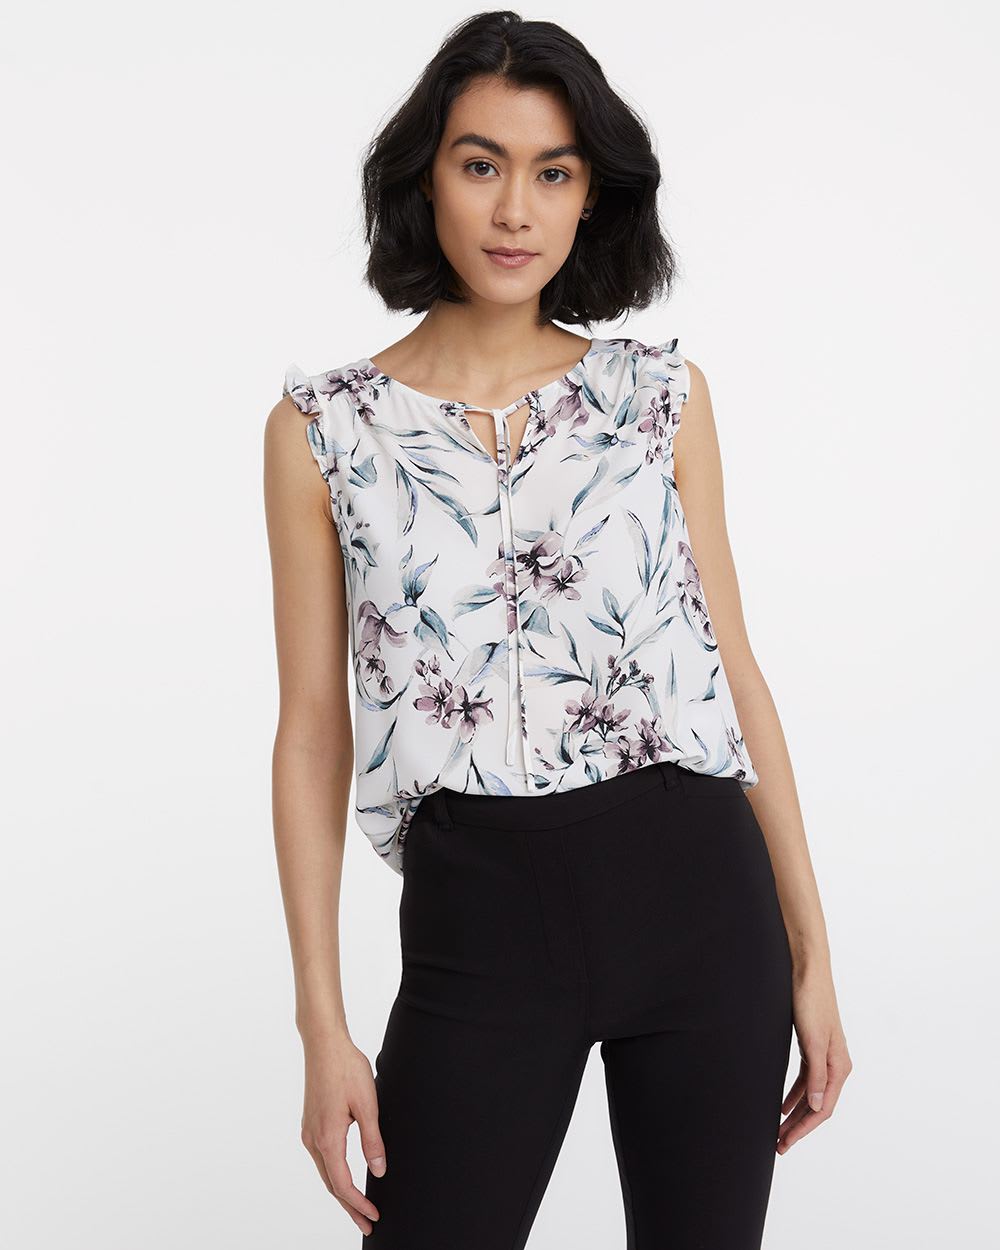 Ruffled Sleeve Crew Neck Printed Top with Tie